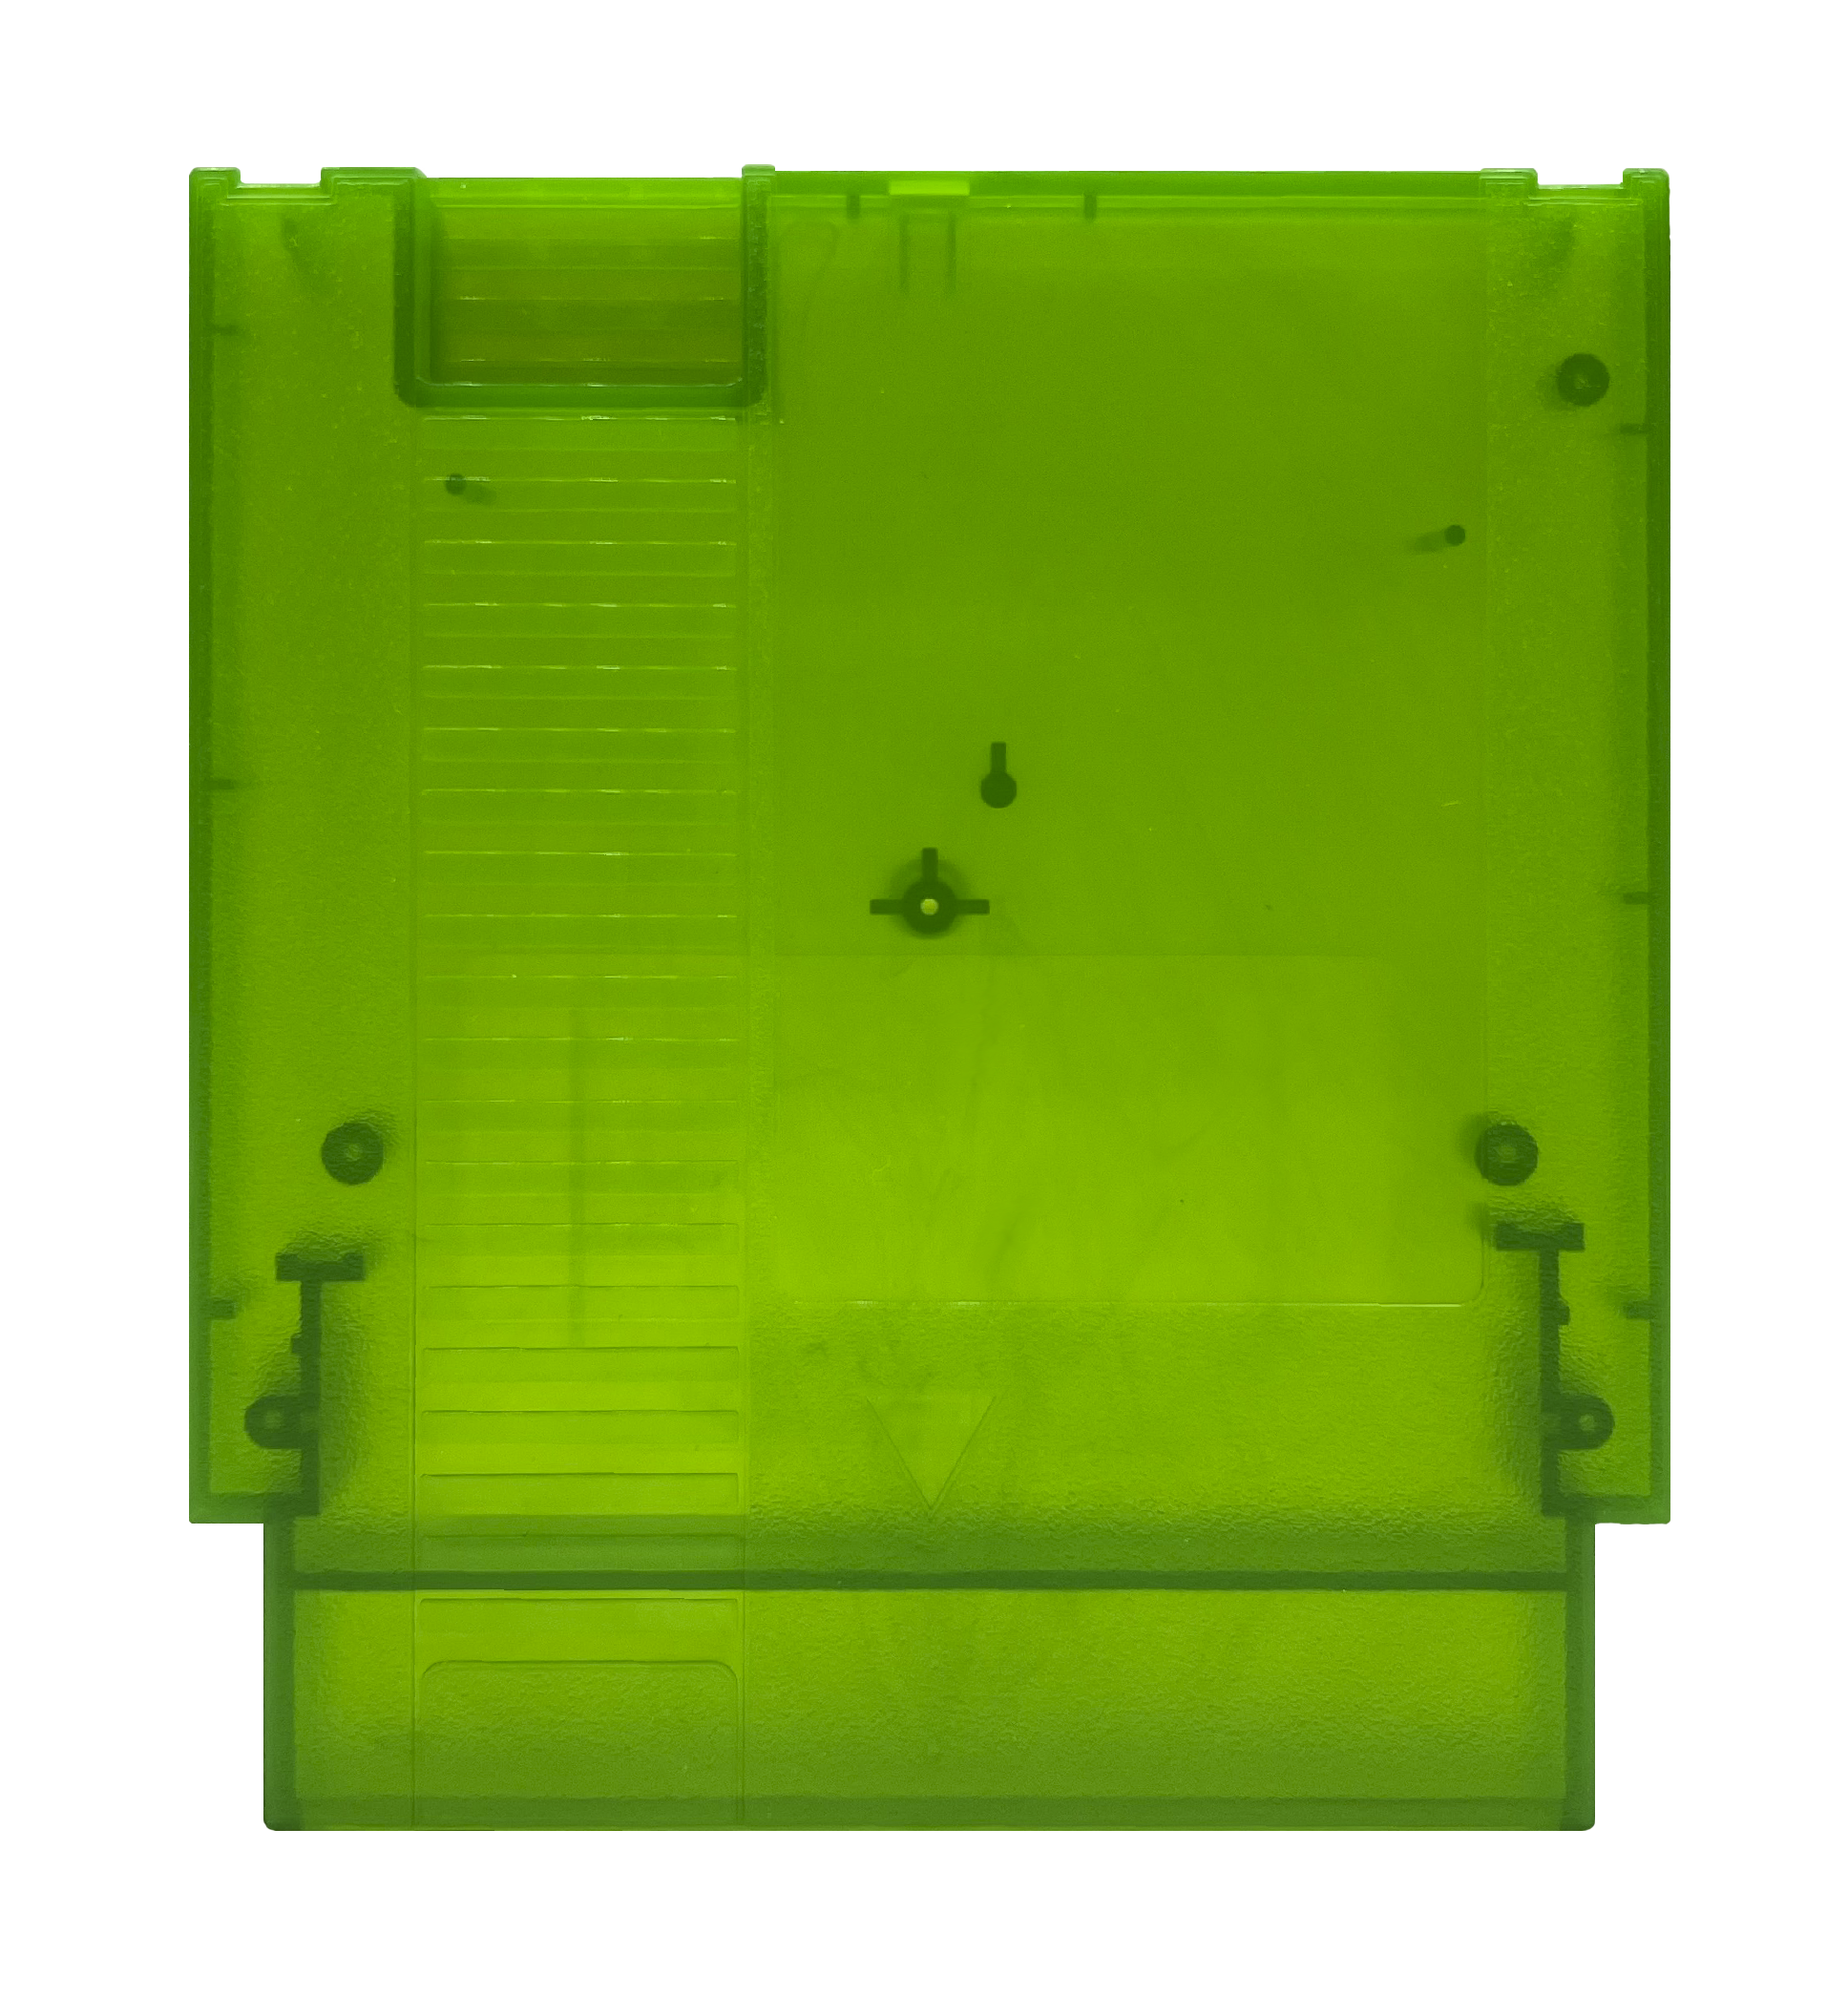 Zombie Green NES (Nintendo Entertainment System) Replacement Cartridge Shell (Slime '80s)